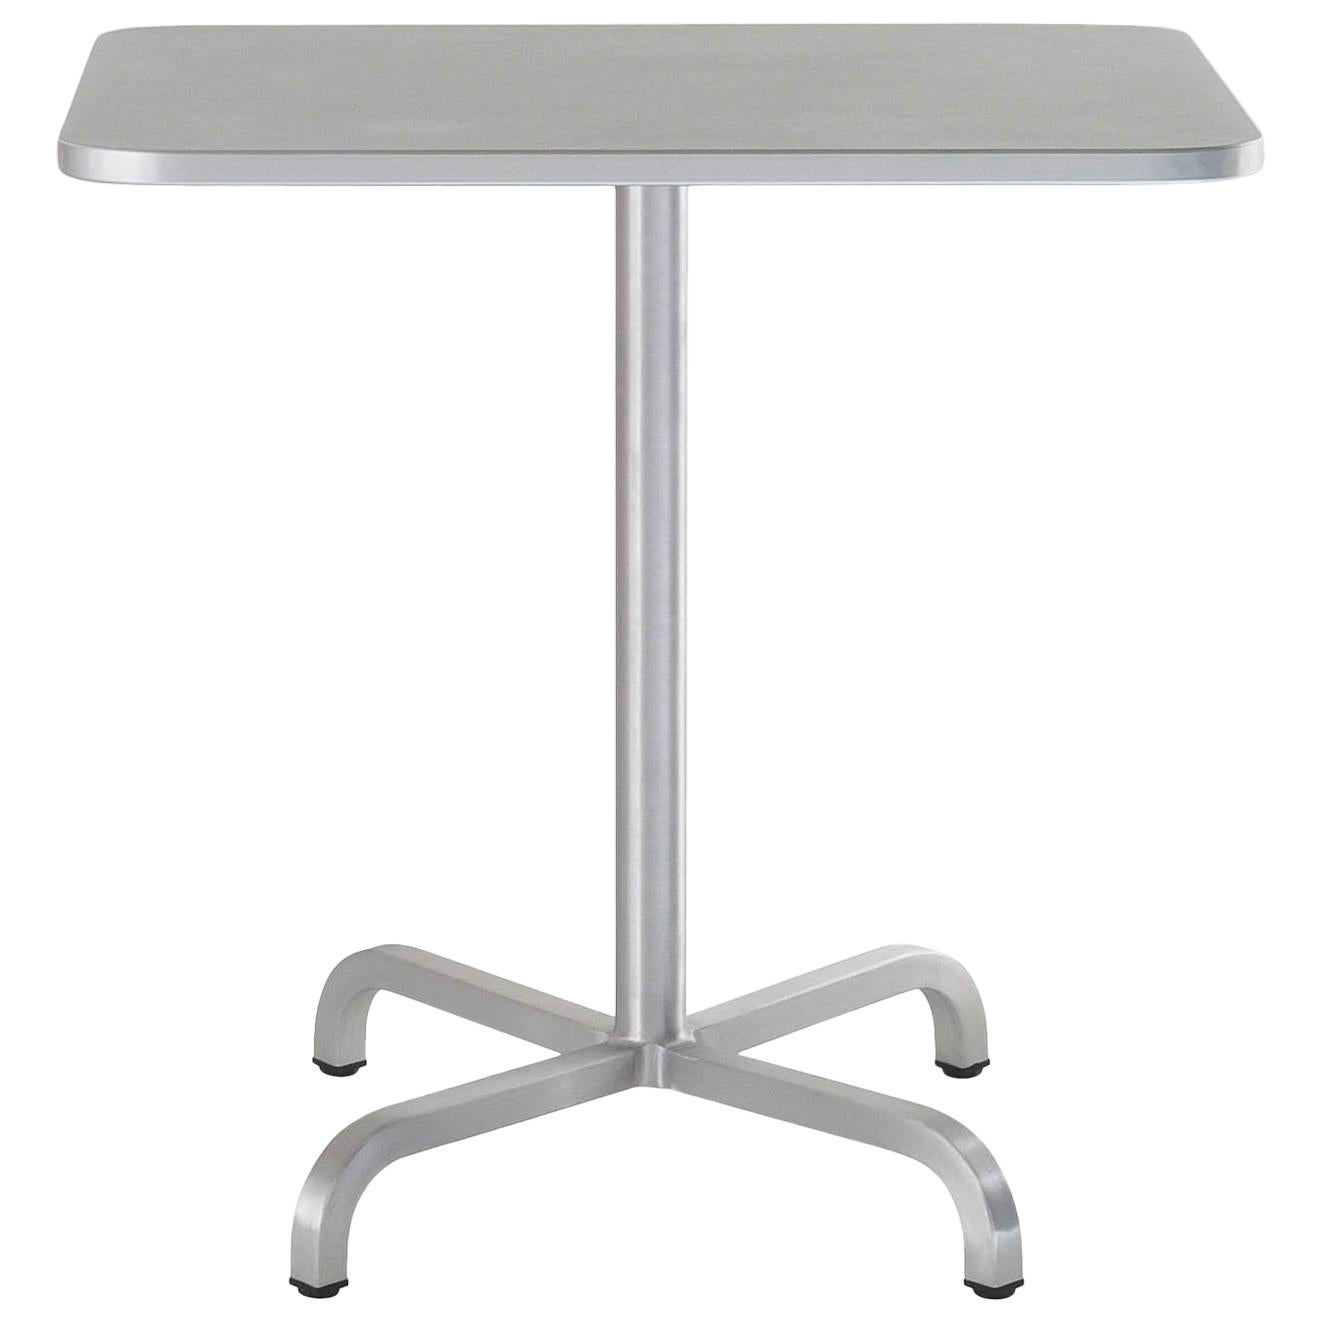 Emeco 20-06 Medium Square Café Table with Gray Laminate Top by Norman Foster For Sale